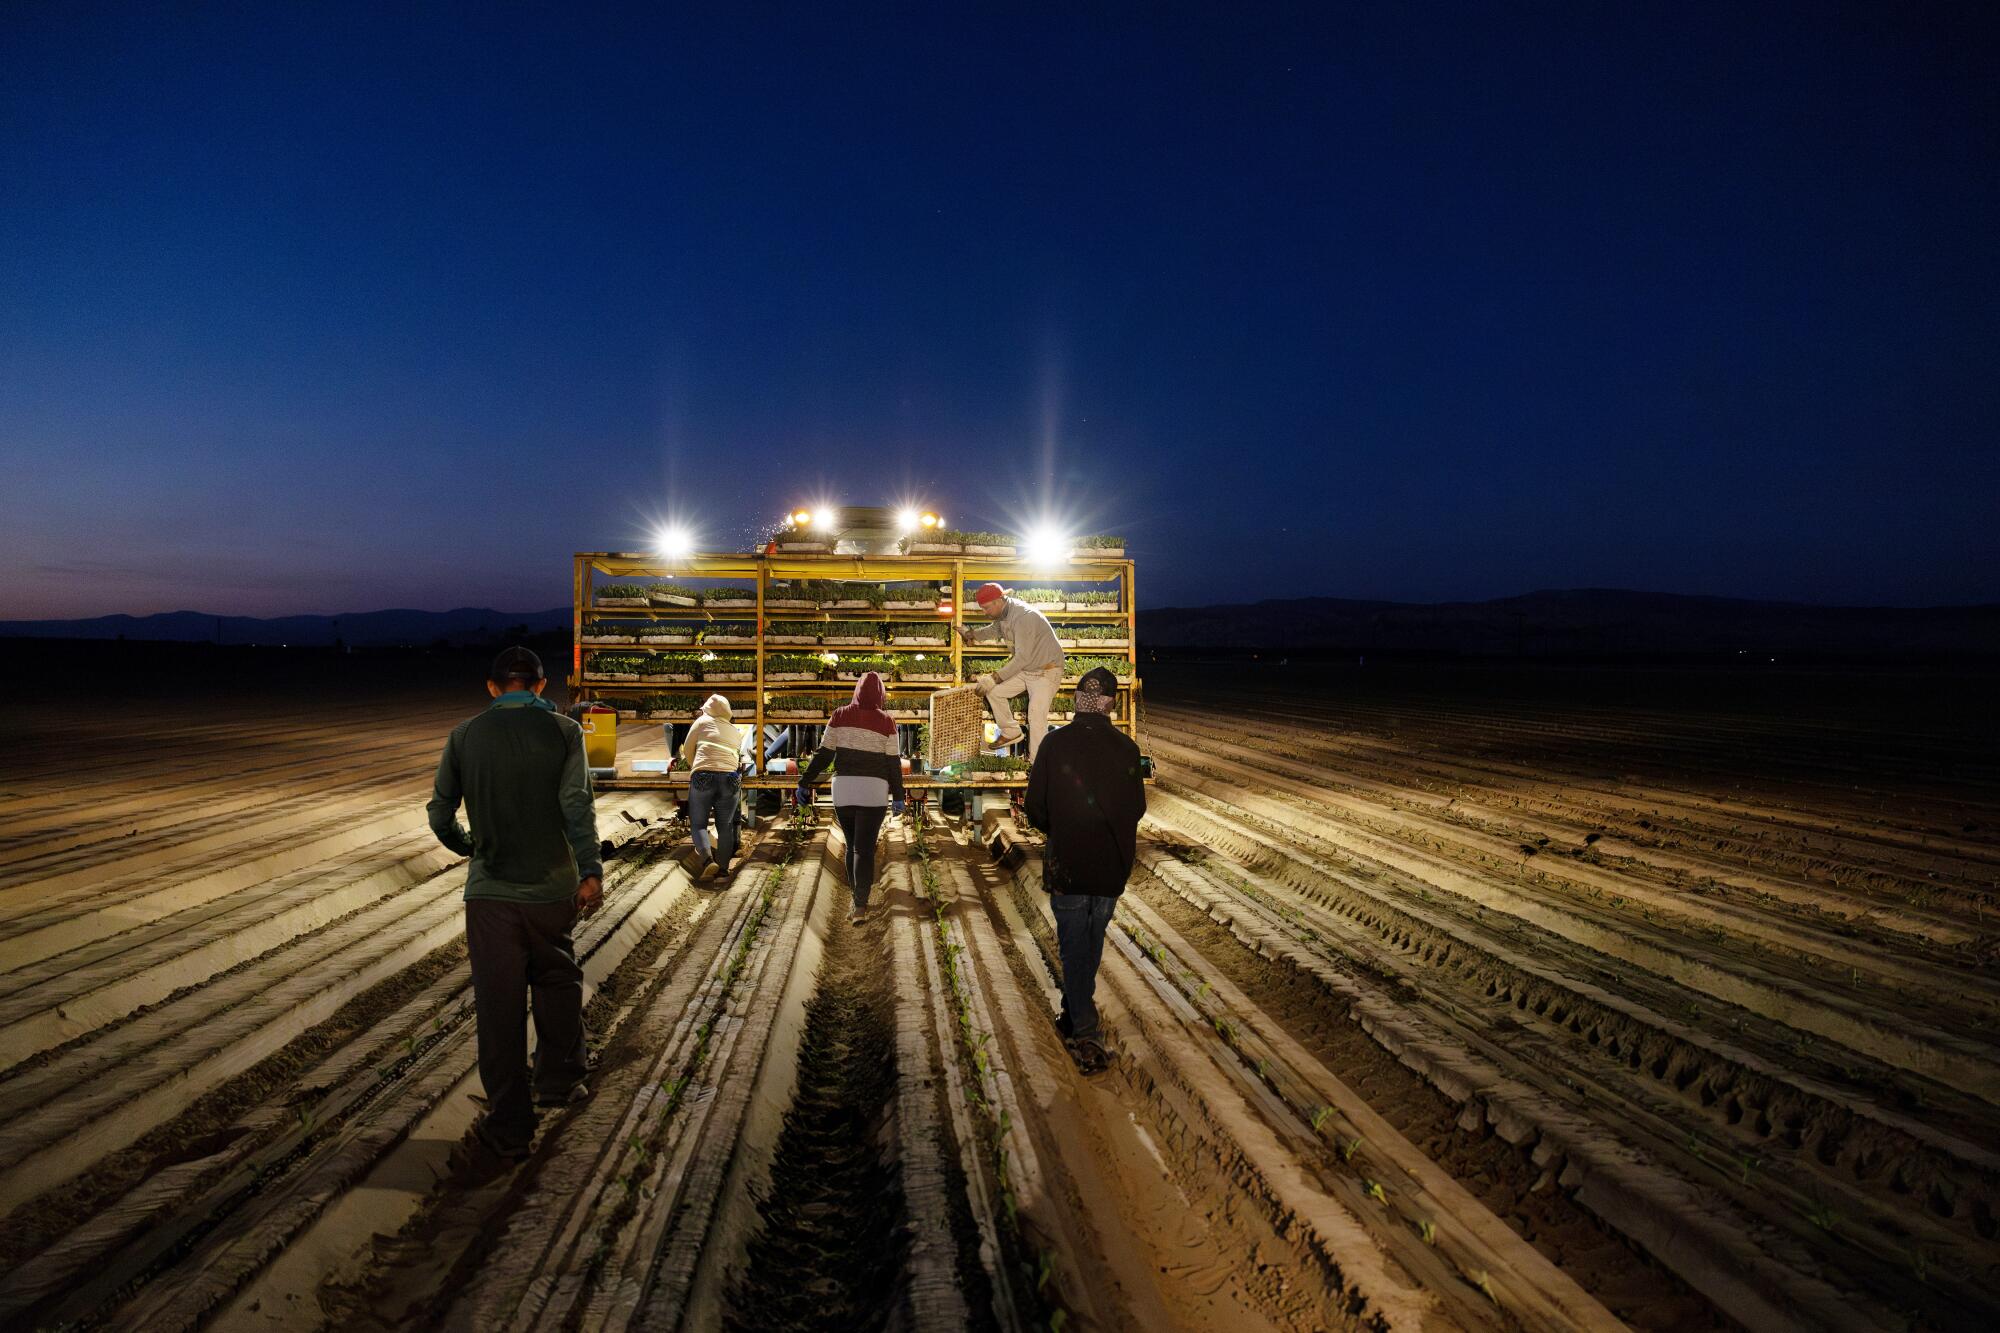 Farmworkers plant seedlings at night to beat the100-degree October temperatures in the Coachella Valley.